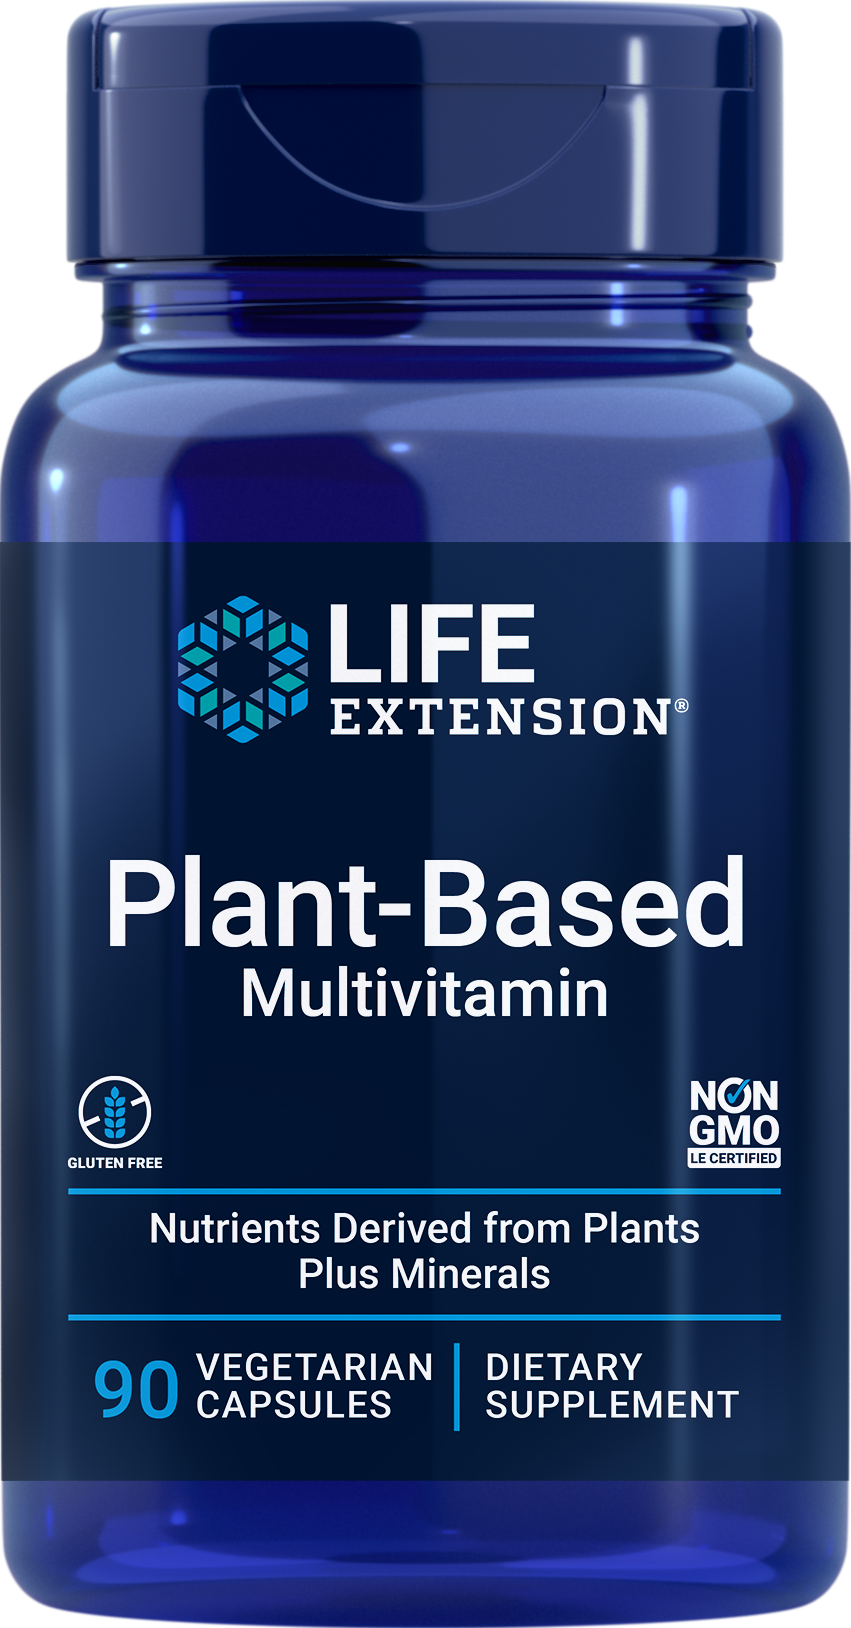 Life Extension's new Plant-Based Multivitamin features a full array of plant-derived vitamins plus minerals to help you stay healthy from head to toe. This product is suitable for vegetarians and is Non-GMO, and provides phytonutrient equivalent to three servings of vegetables and two servings of fruits. This product encourages cellular health and a healthy immune response (and more). It also protects against oxidative stress, promoting bone, heart and brain health.